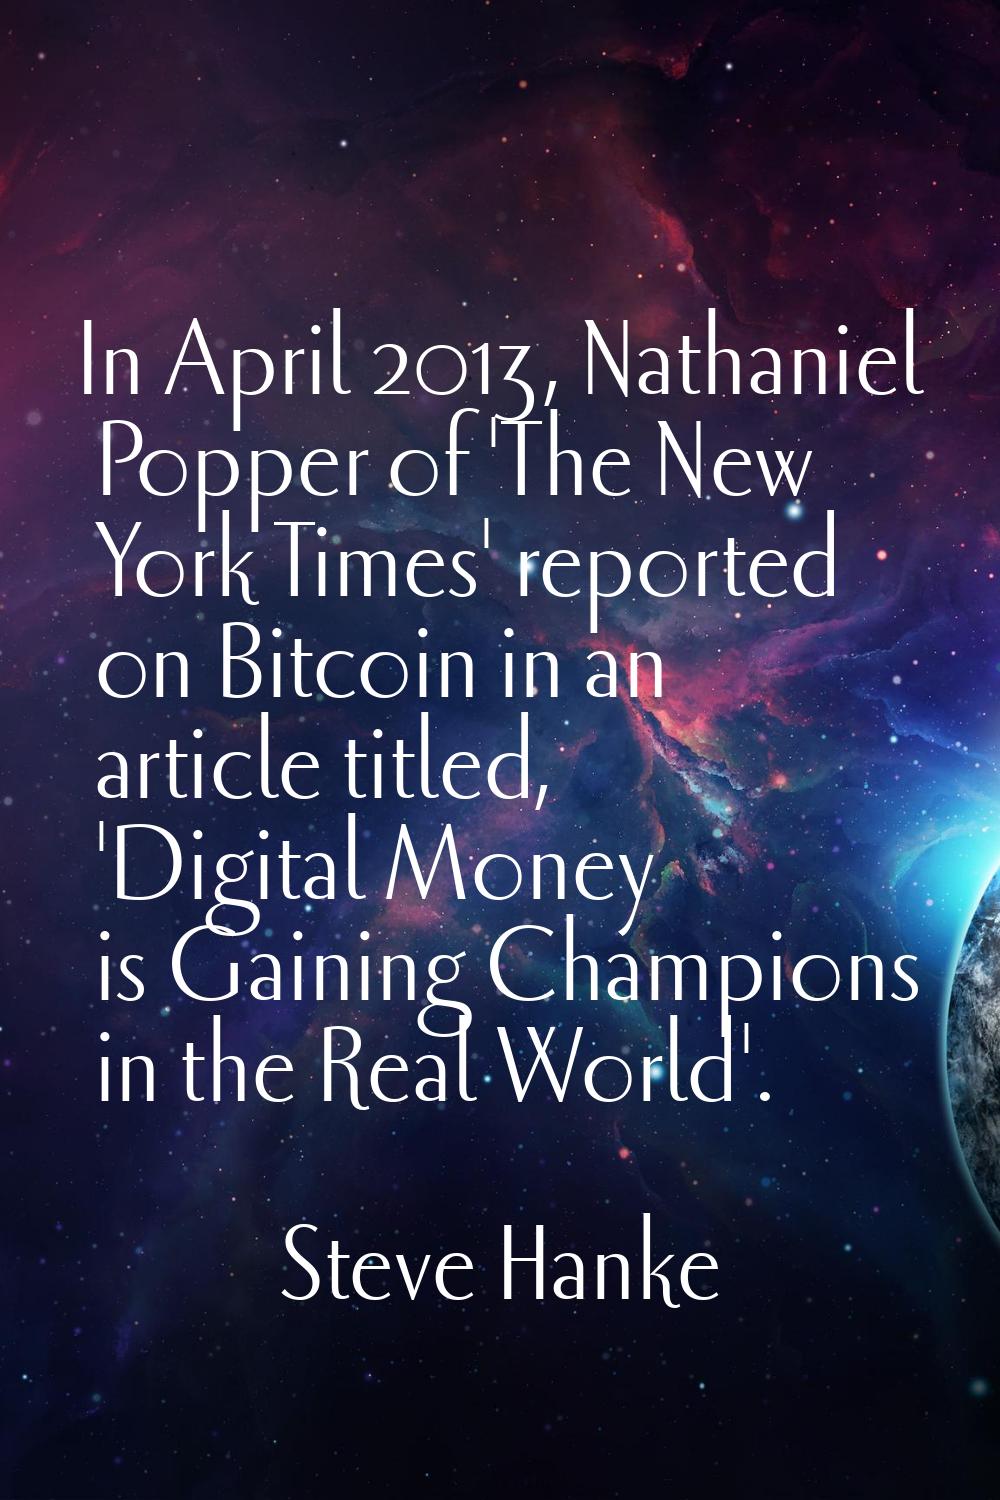 In April 2013, Nathaniel Popper of 'The New York Times' reported on Bitcoin in an article titled, '